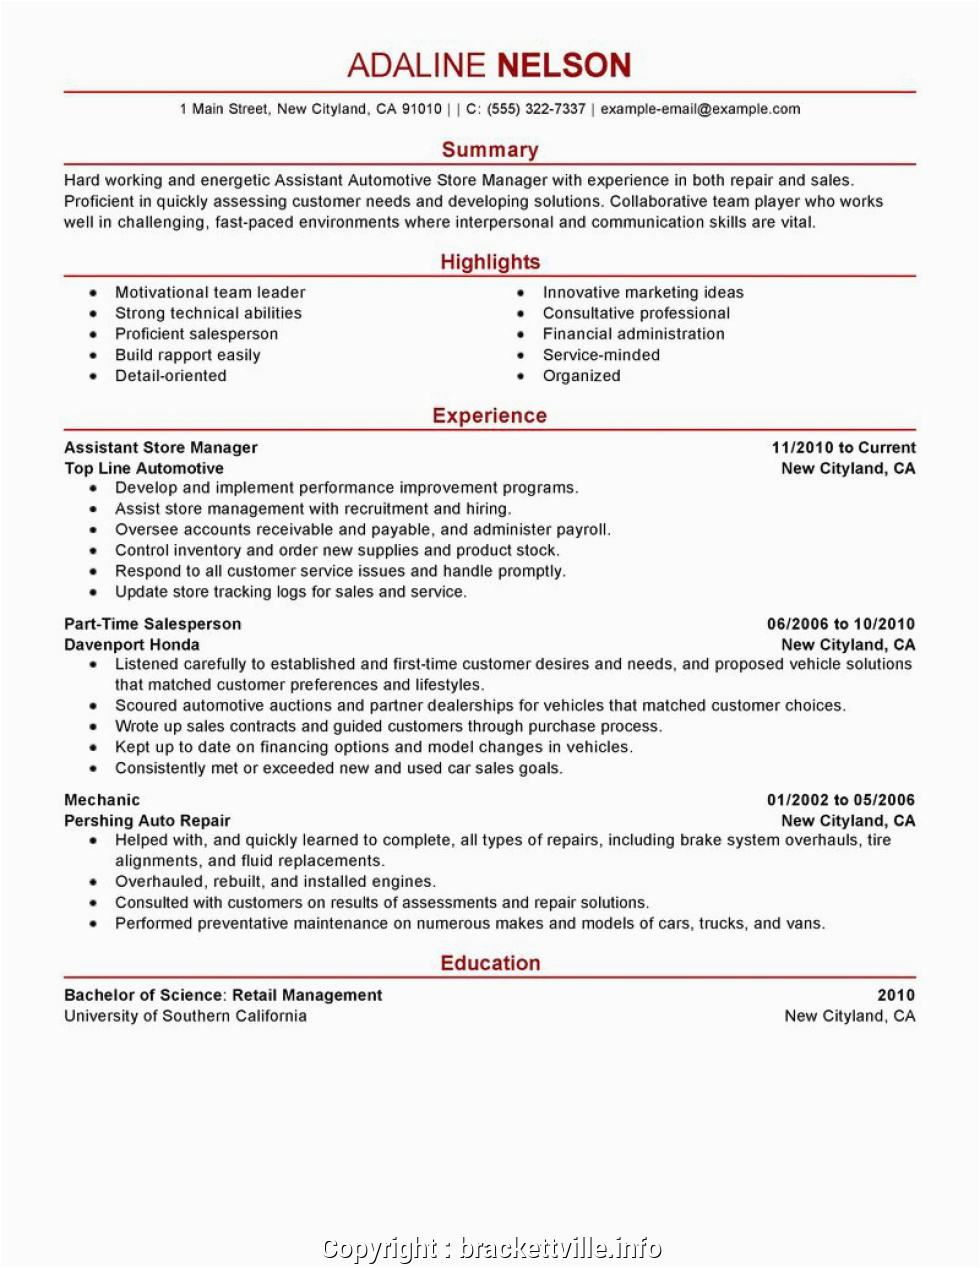 best retail outlet manager resume